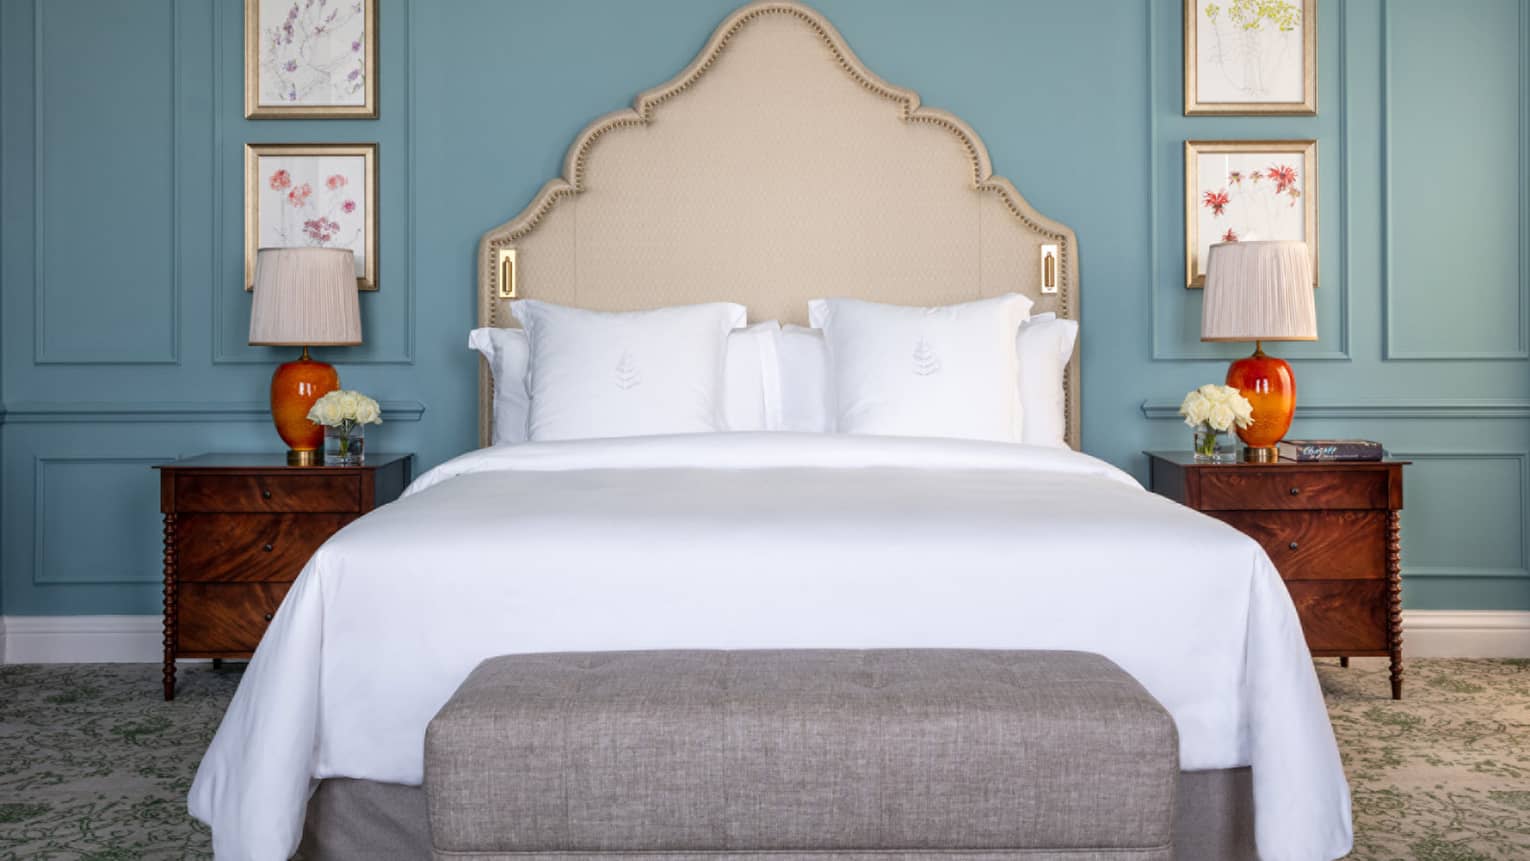 Guest room with Queen bed, white linens, cream headboard, paisley carpeting, cherry bed side tables, turquoise walls